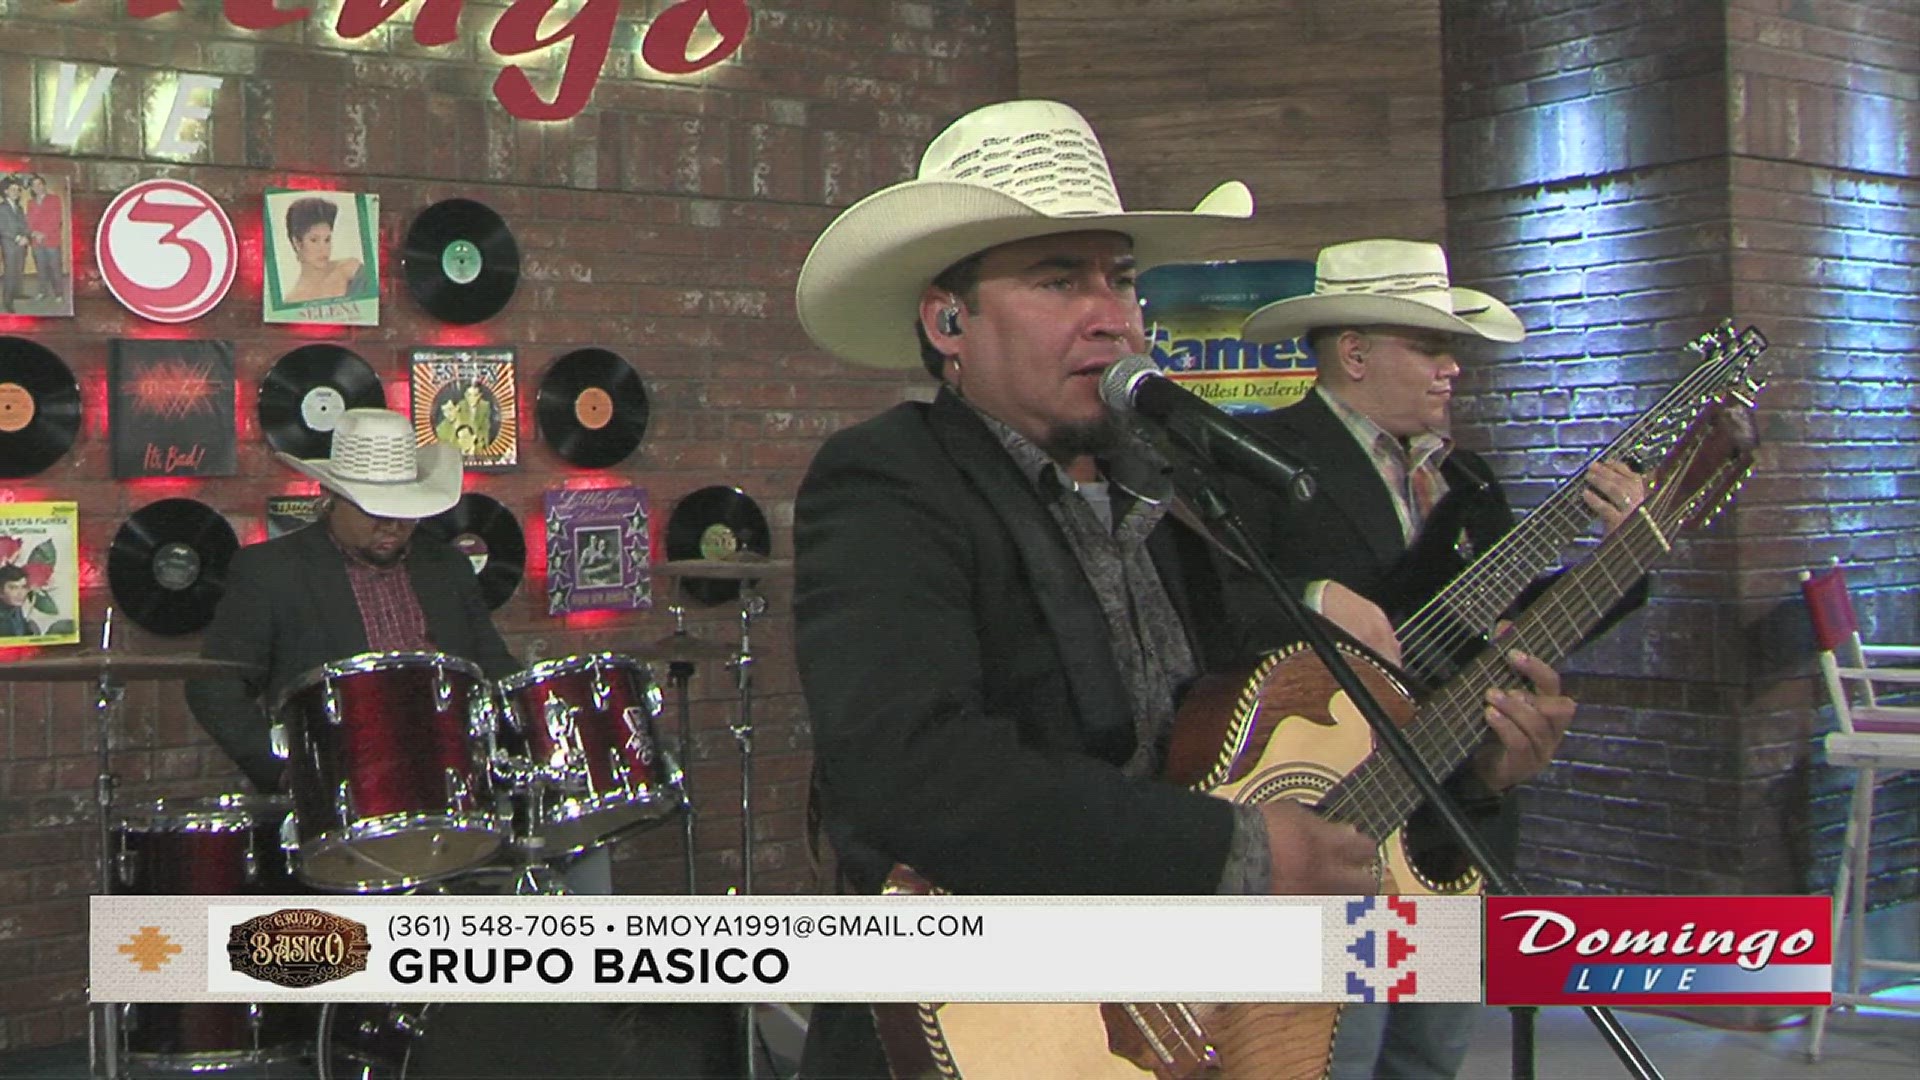 Corpus Christi's own Grupo Basico joined us on Domingo Live to perform their original song "No Siento Igual."